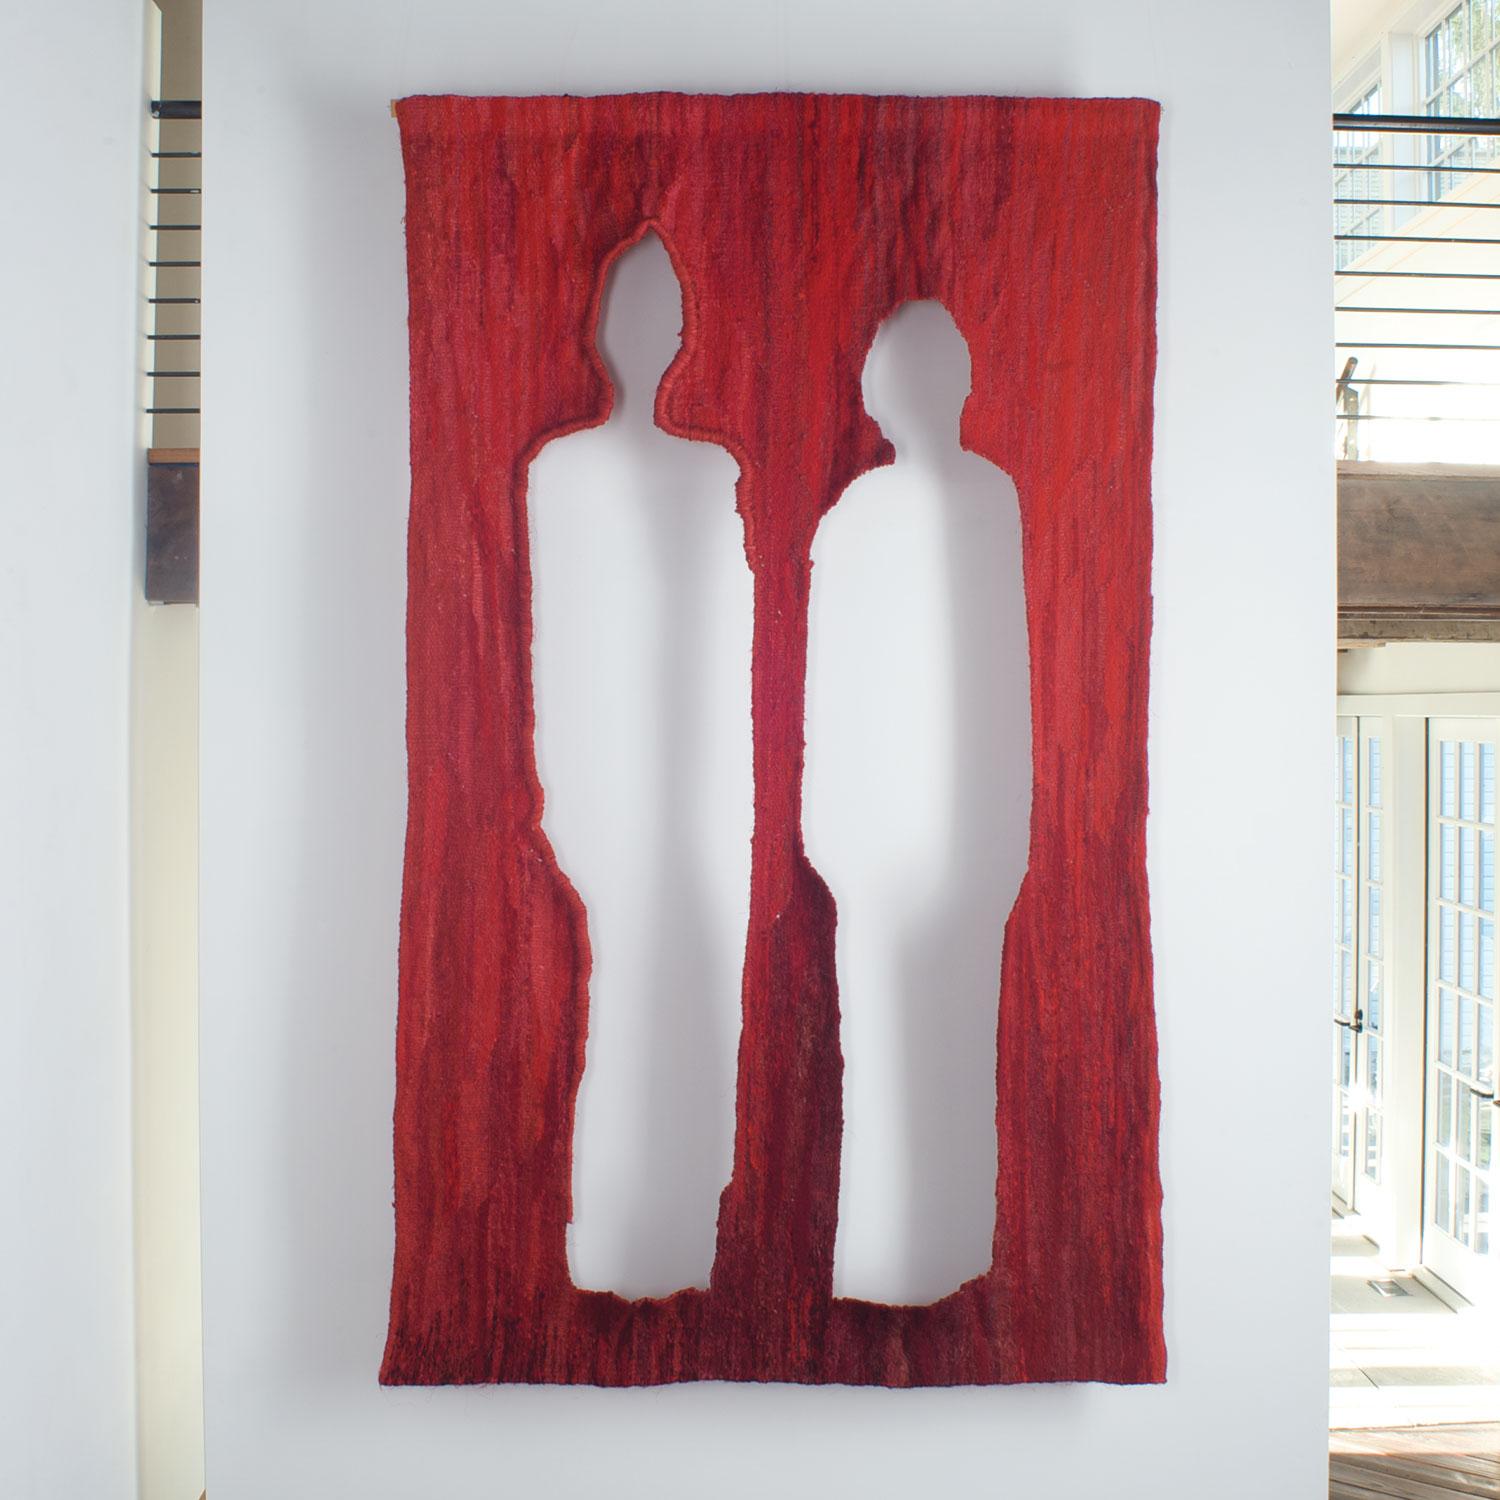 Lilla Kulka Abstract Sculpture - Pair, Red Woven Abstract Tapestry of Figures, Textile Sculpture